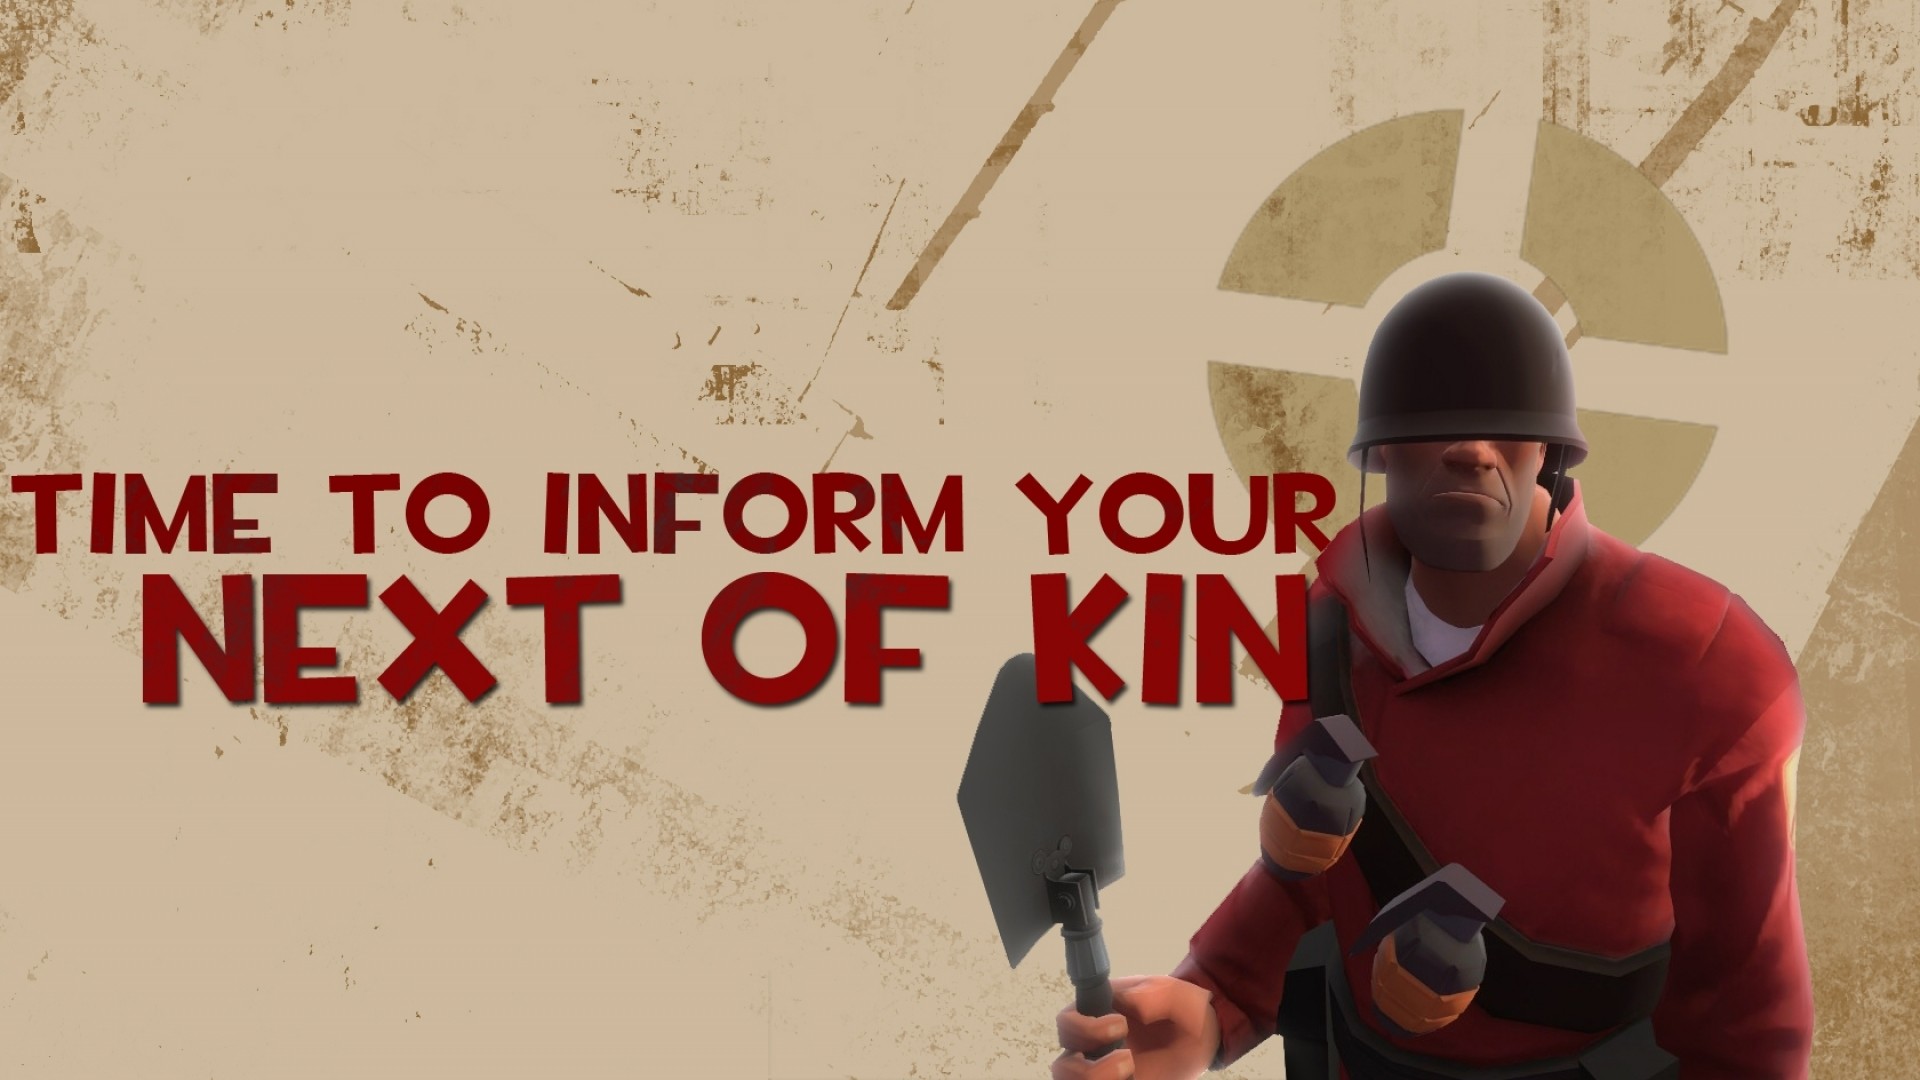 TF2 Wallpapers